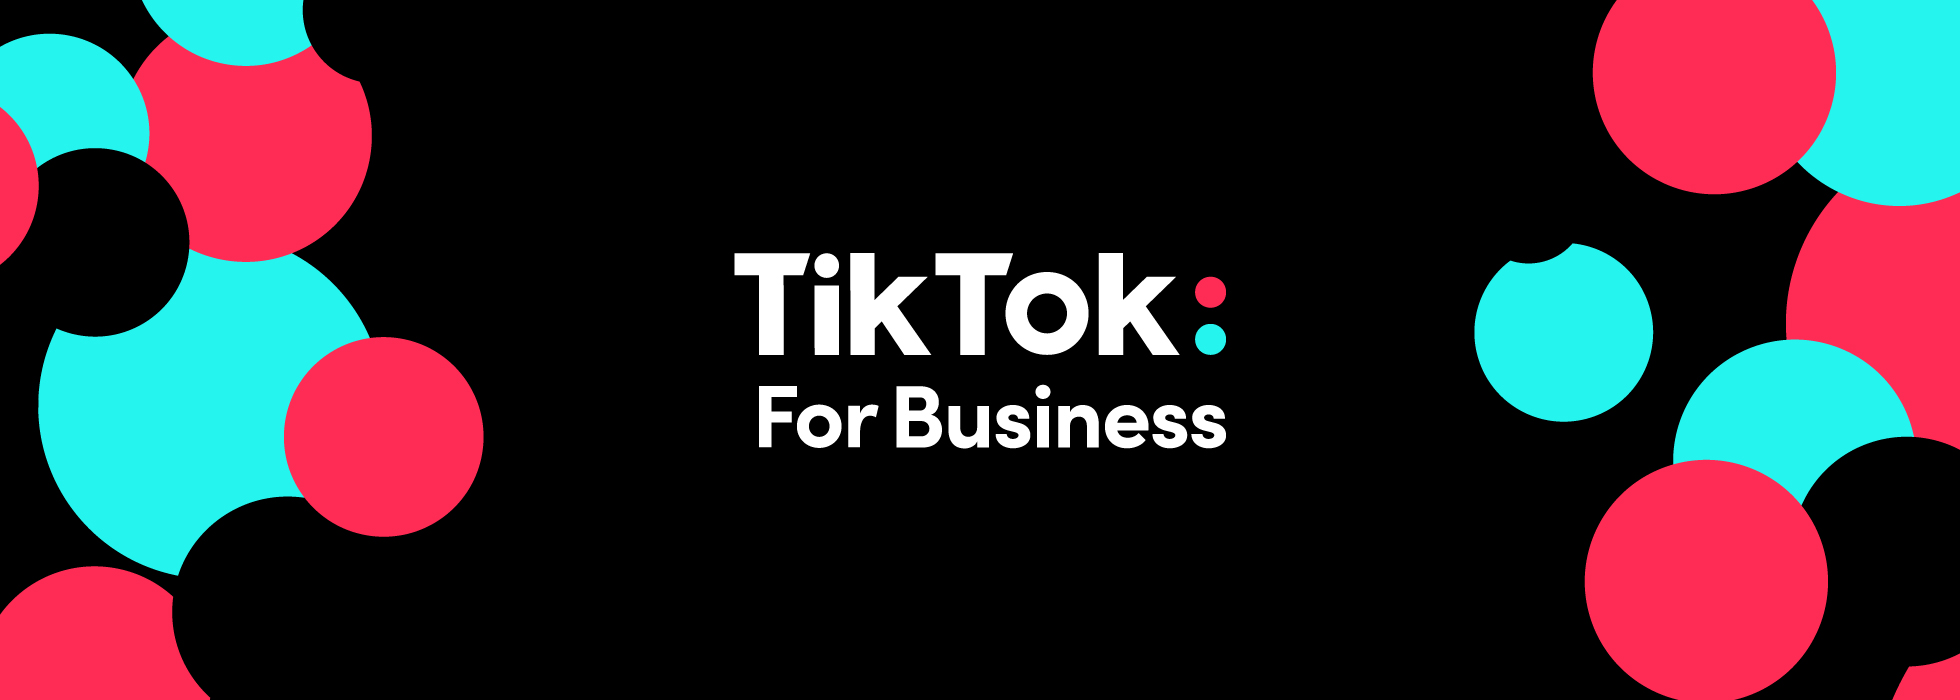 How to Get Verified on TikTok: What Can You Do to Increase Your Chance?